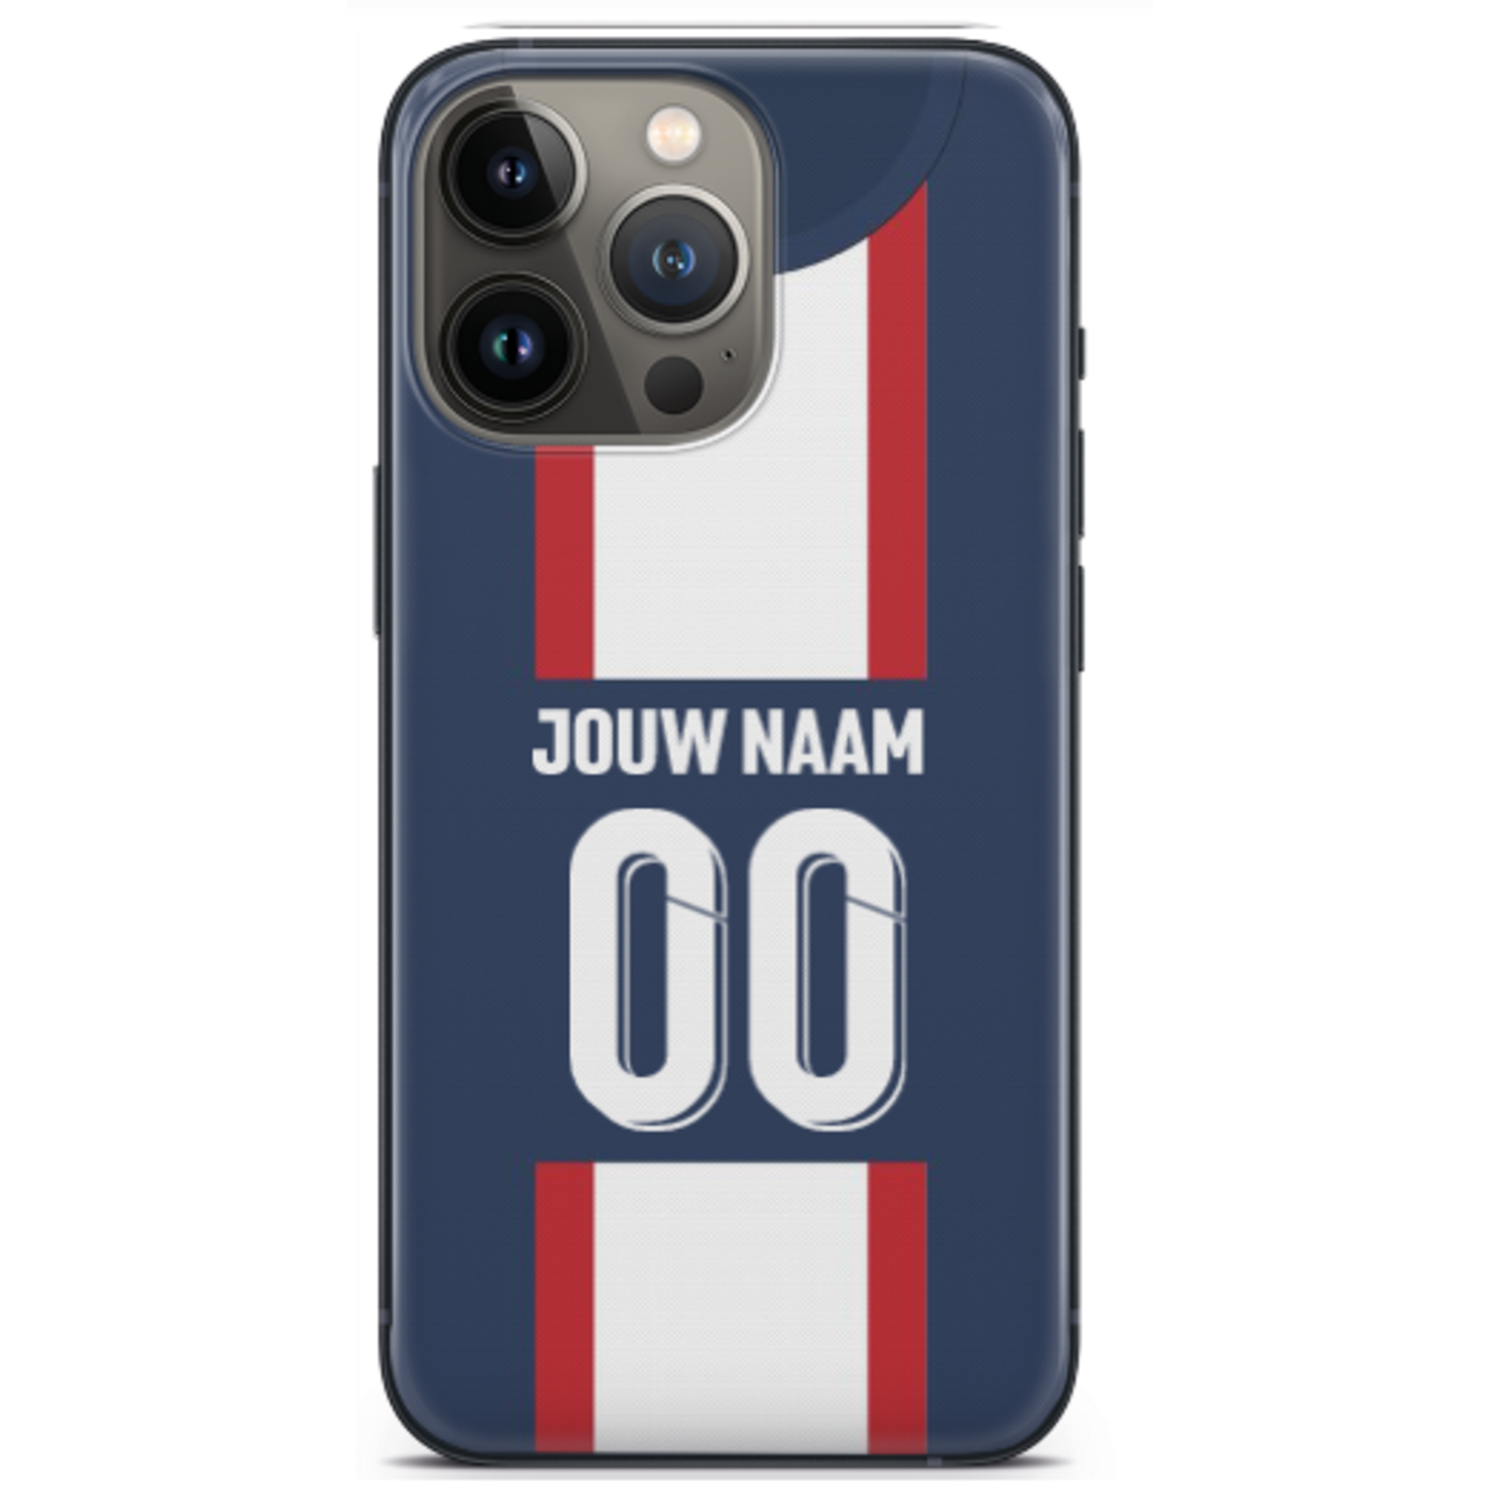 tint ze Calamiteit iPhone voetbal hoesje PSG - Phone-Factory